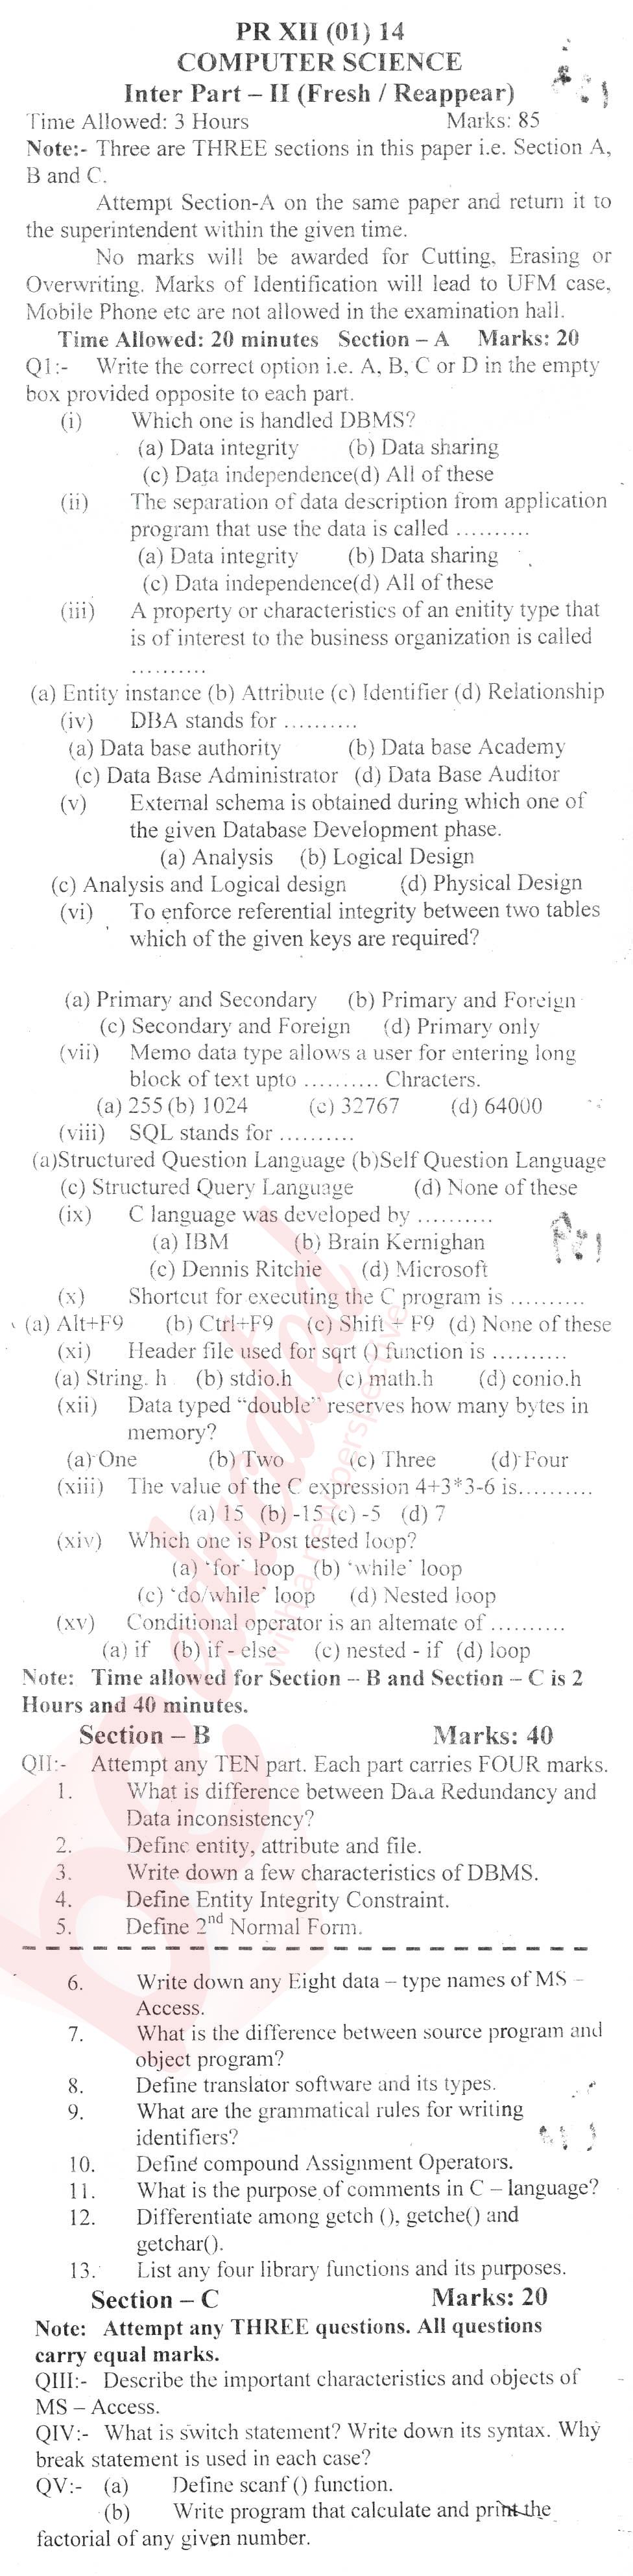 Computer Science ICS Part 2 Past Paper Group 1 BISE Bannu 2014